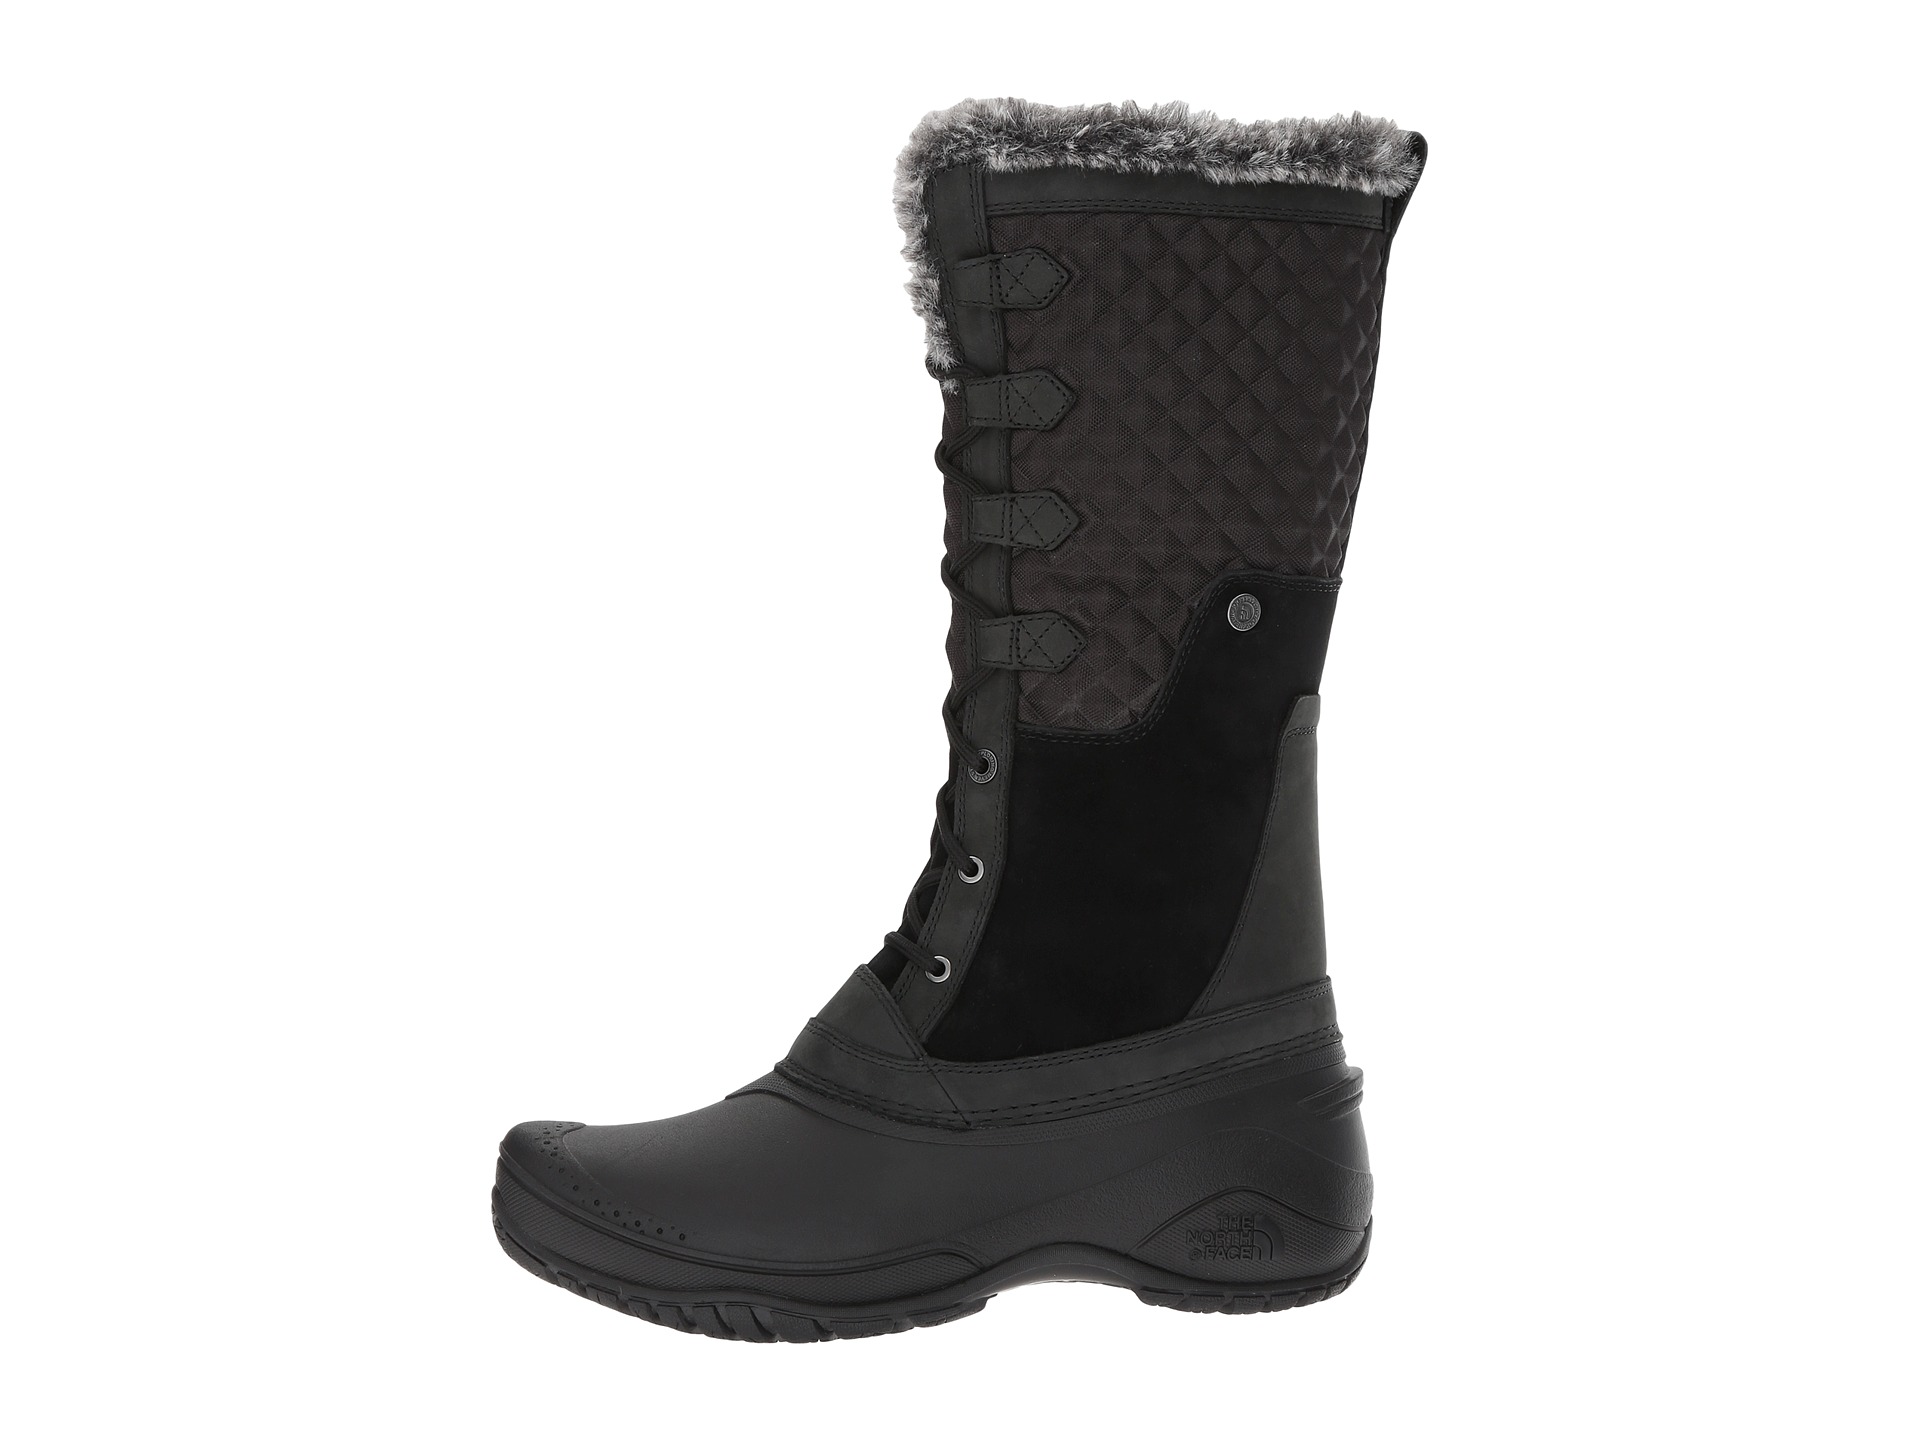 The North Face Shellista III Tall at Zappos.com